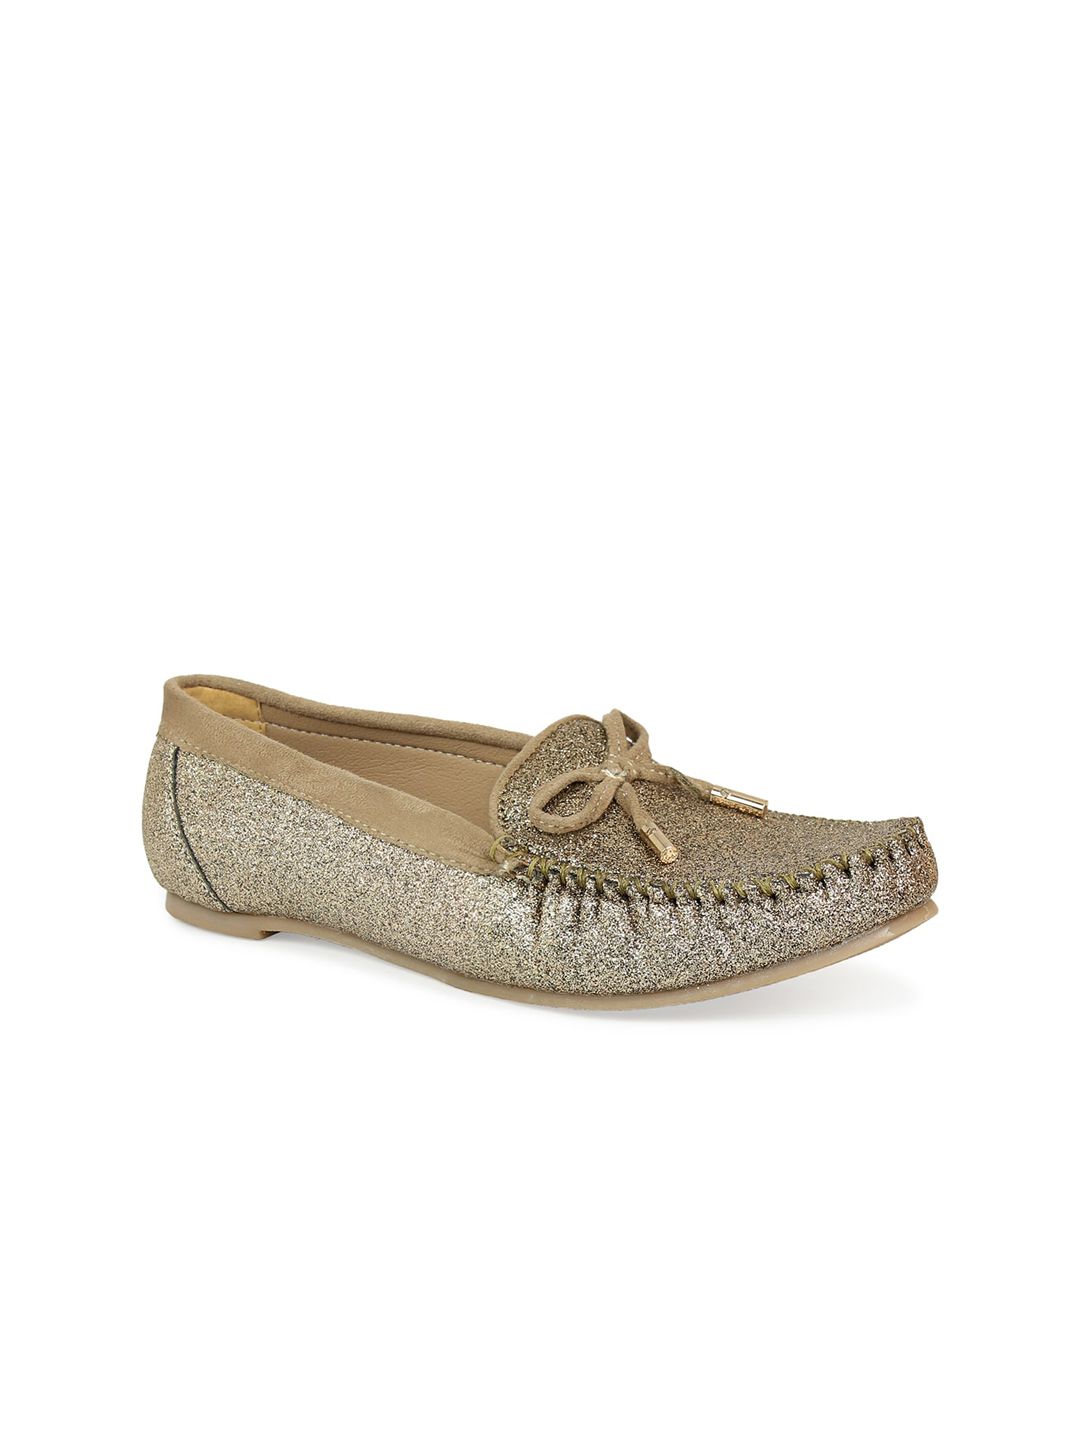 DESIGN CREW Women Gold-Toned Loafers Price in India